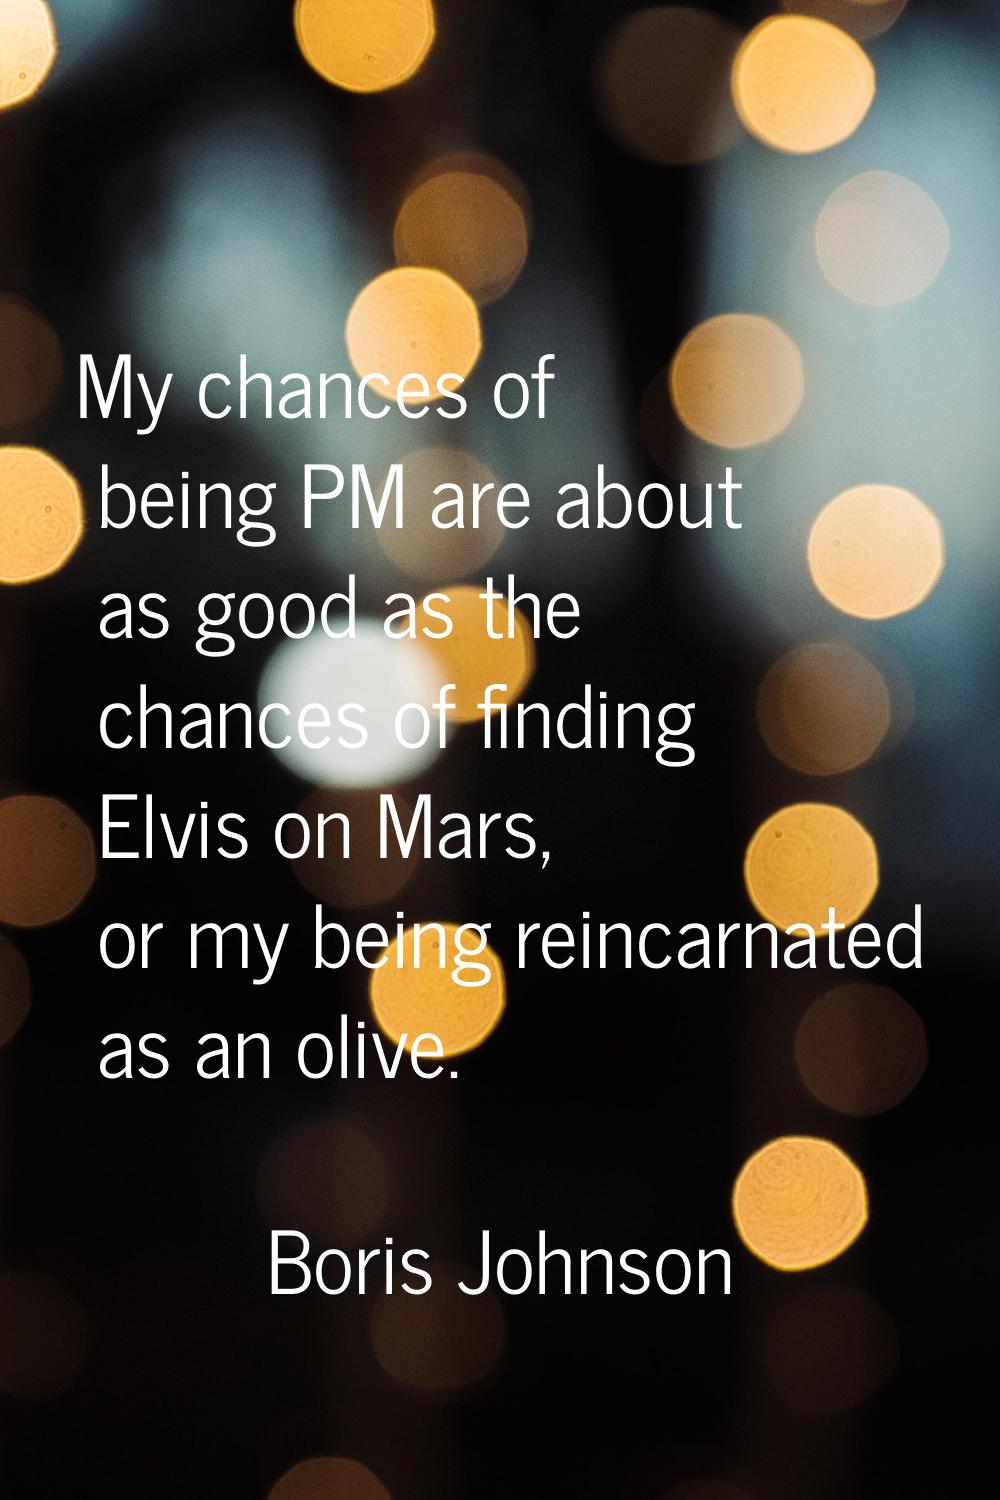 My chances of being PM are about as good as the chances of finding Elvis on Mars, or my being reinc